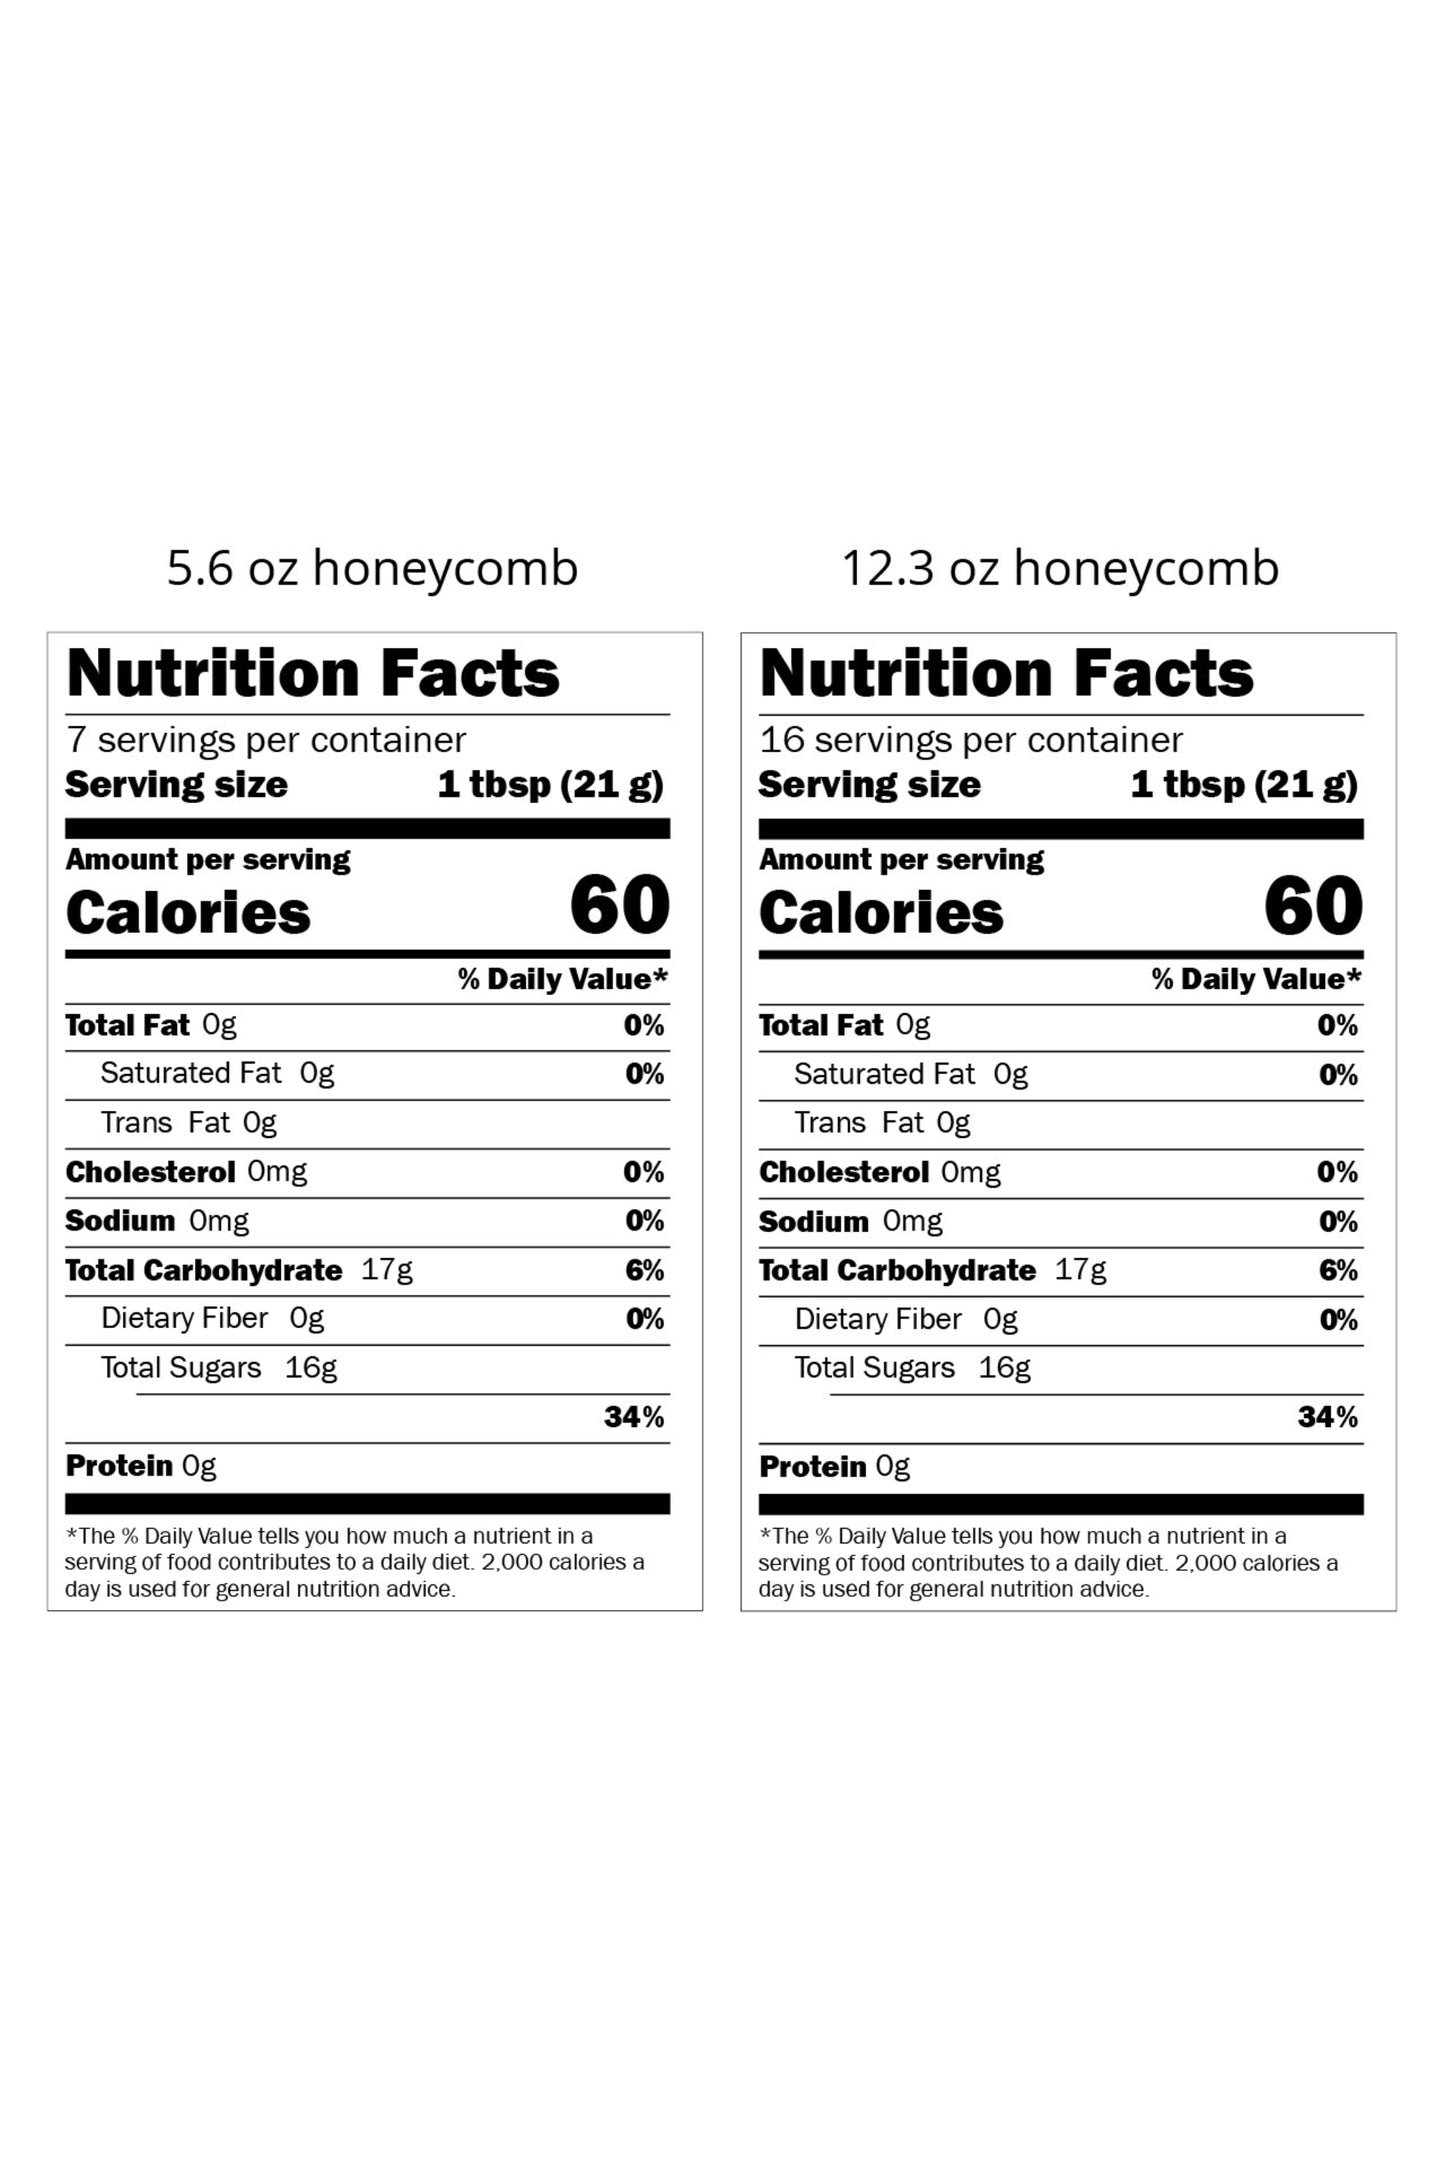 The nutrition label for honeycomb.